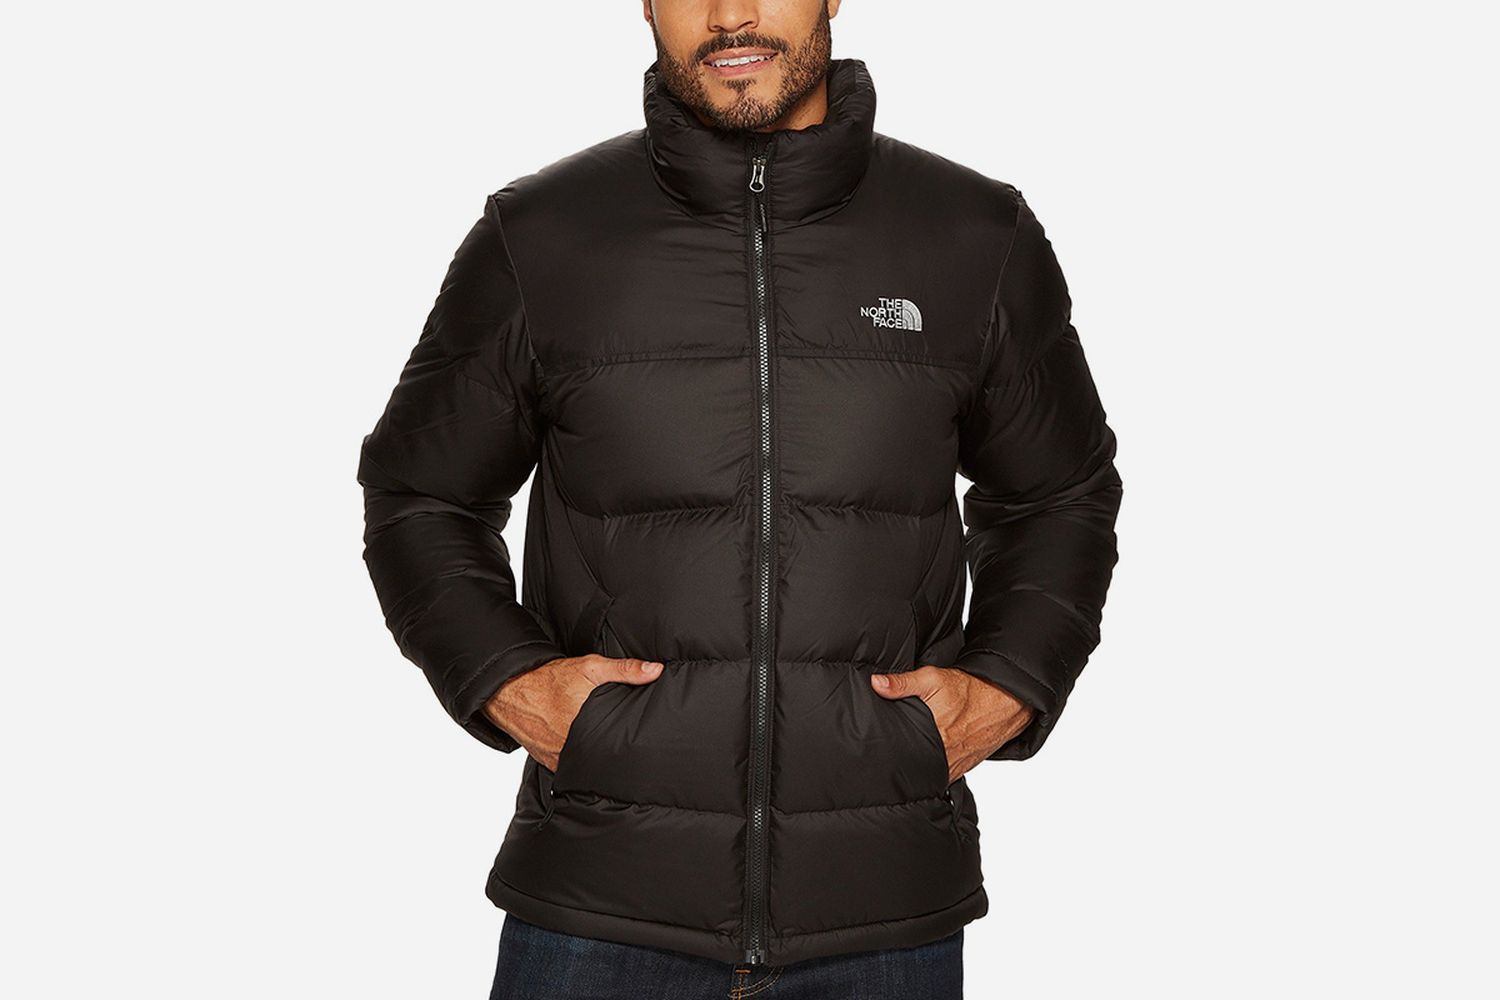 North Nuptse Jacket: Our 8 Favorites to Buy Right Now